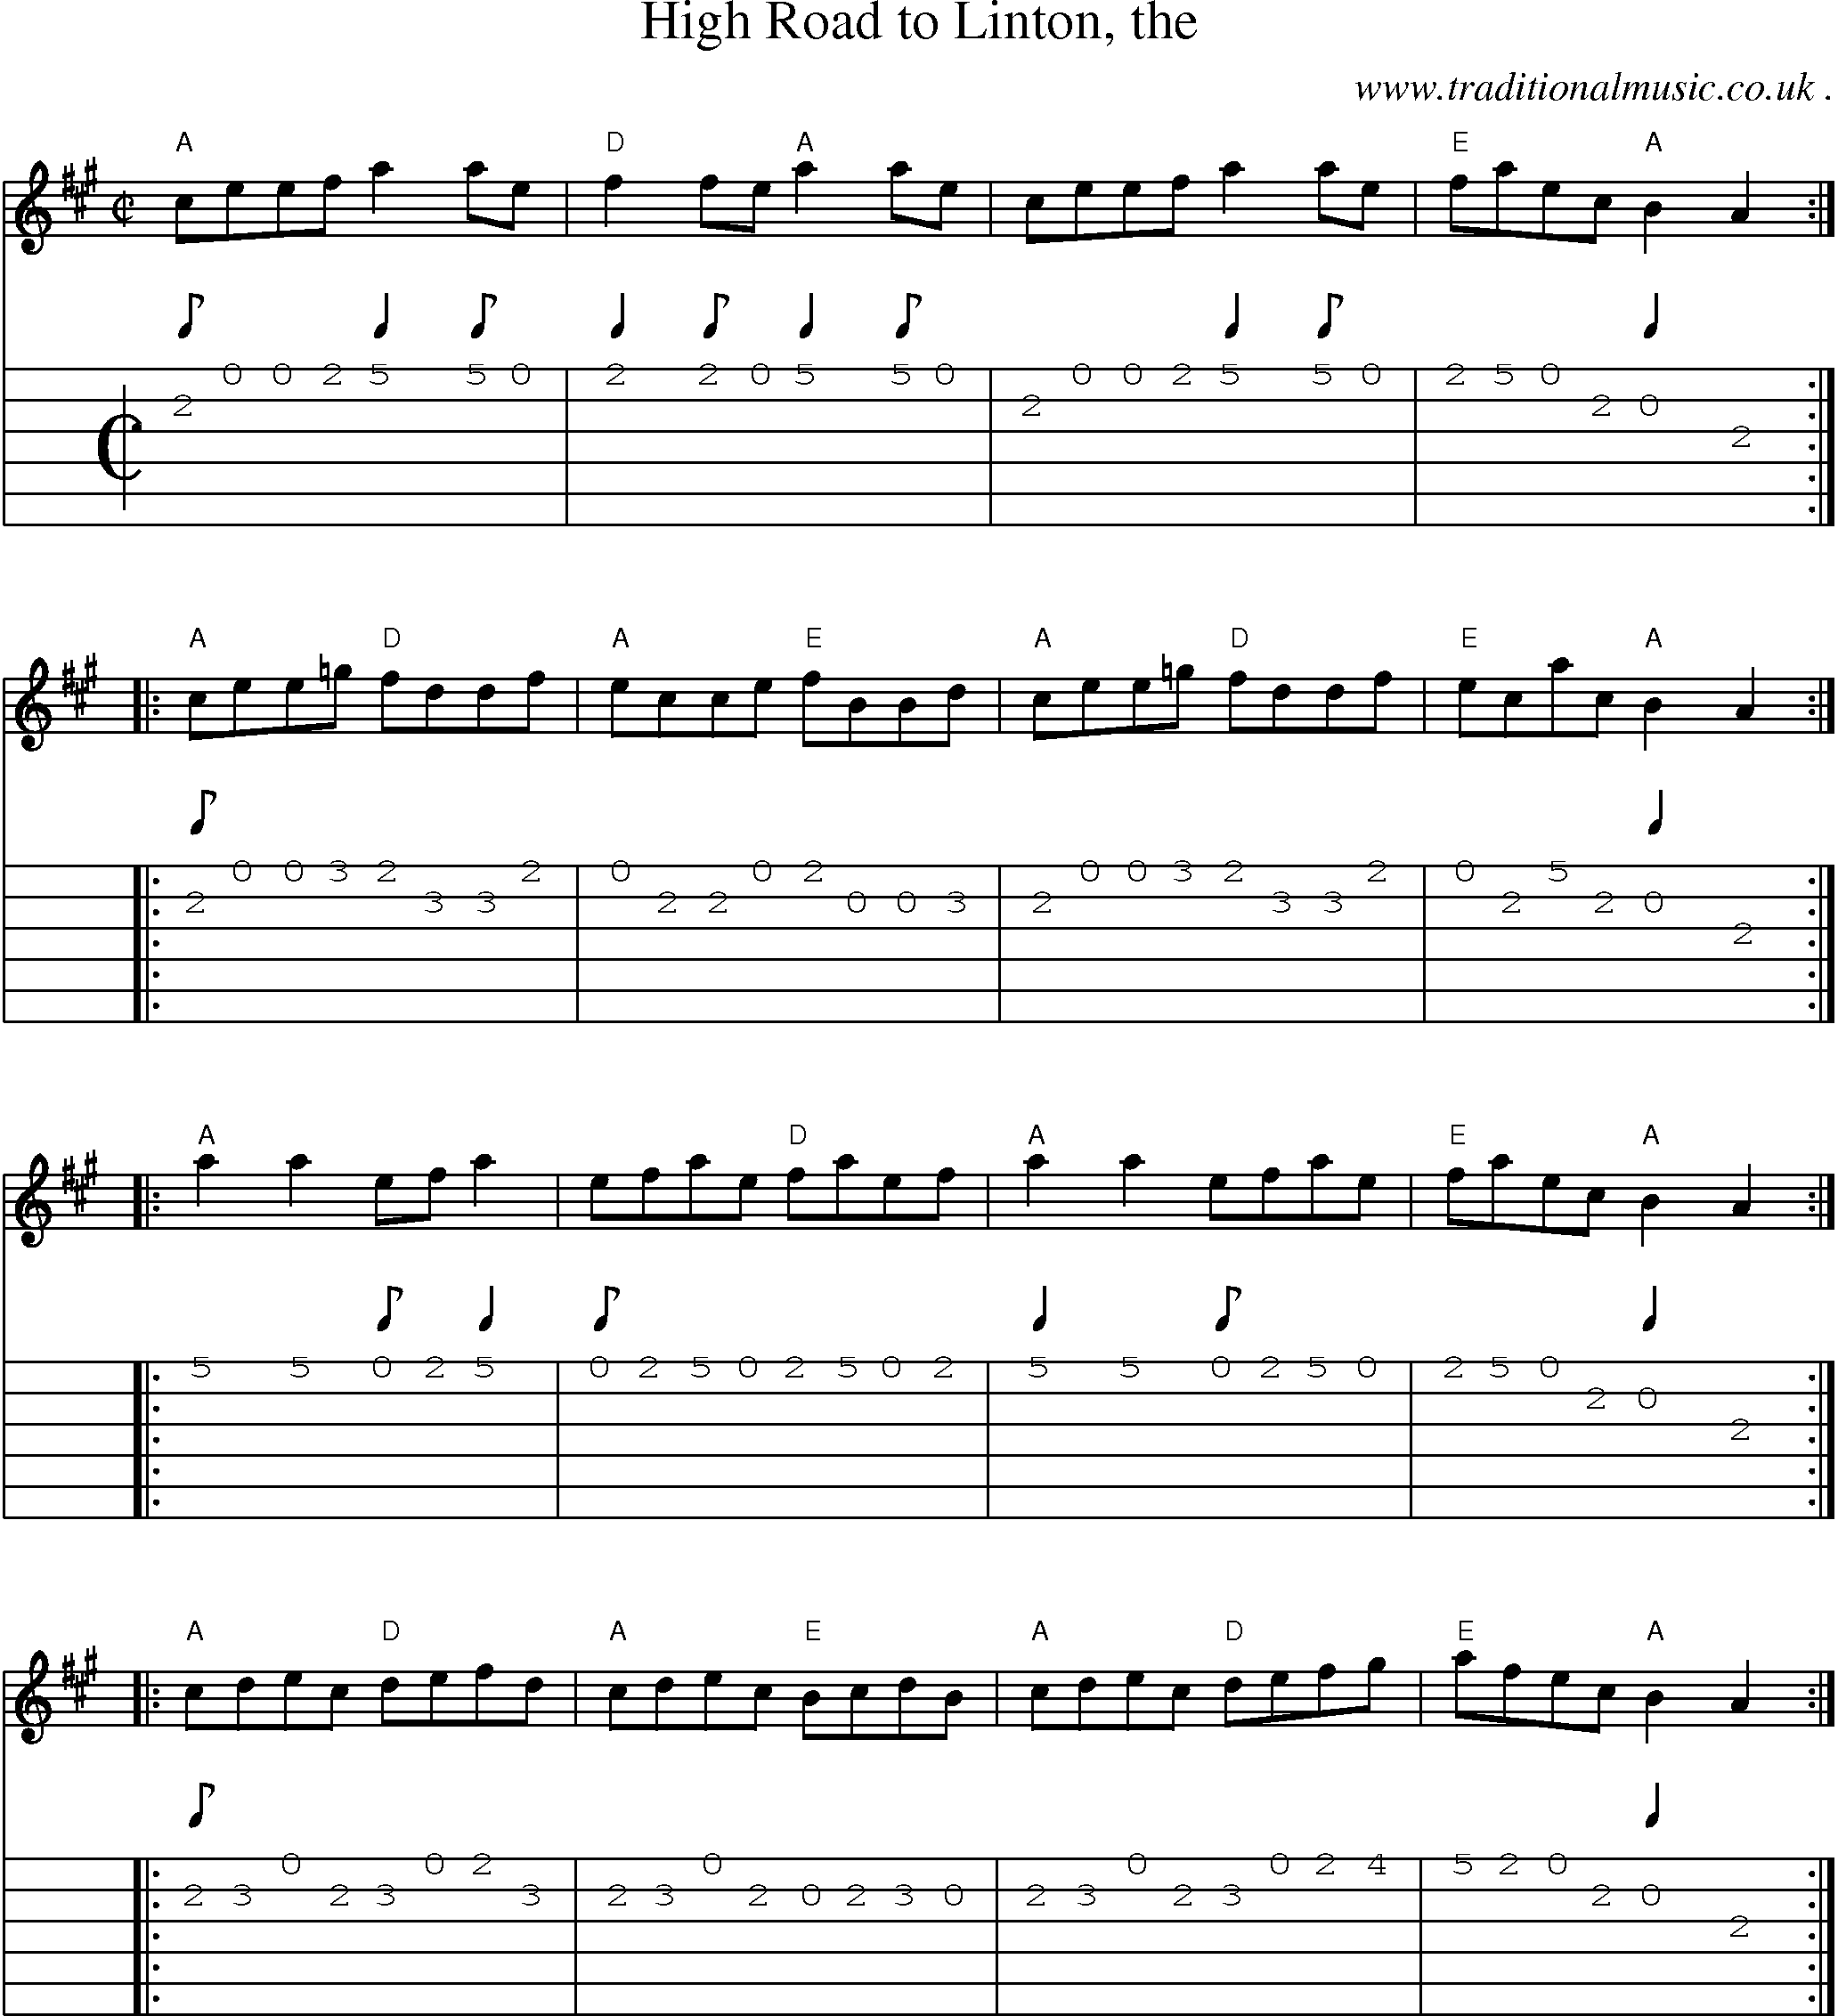 Sheet-music  score, Chords and Guitar Tabs for High Road To Linton The